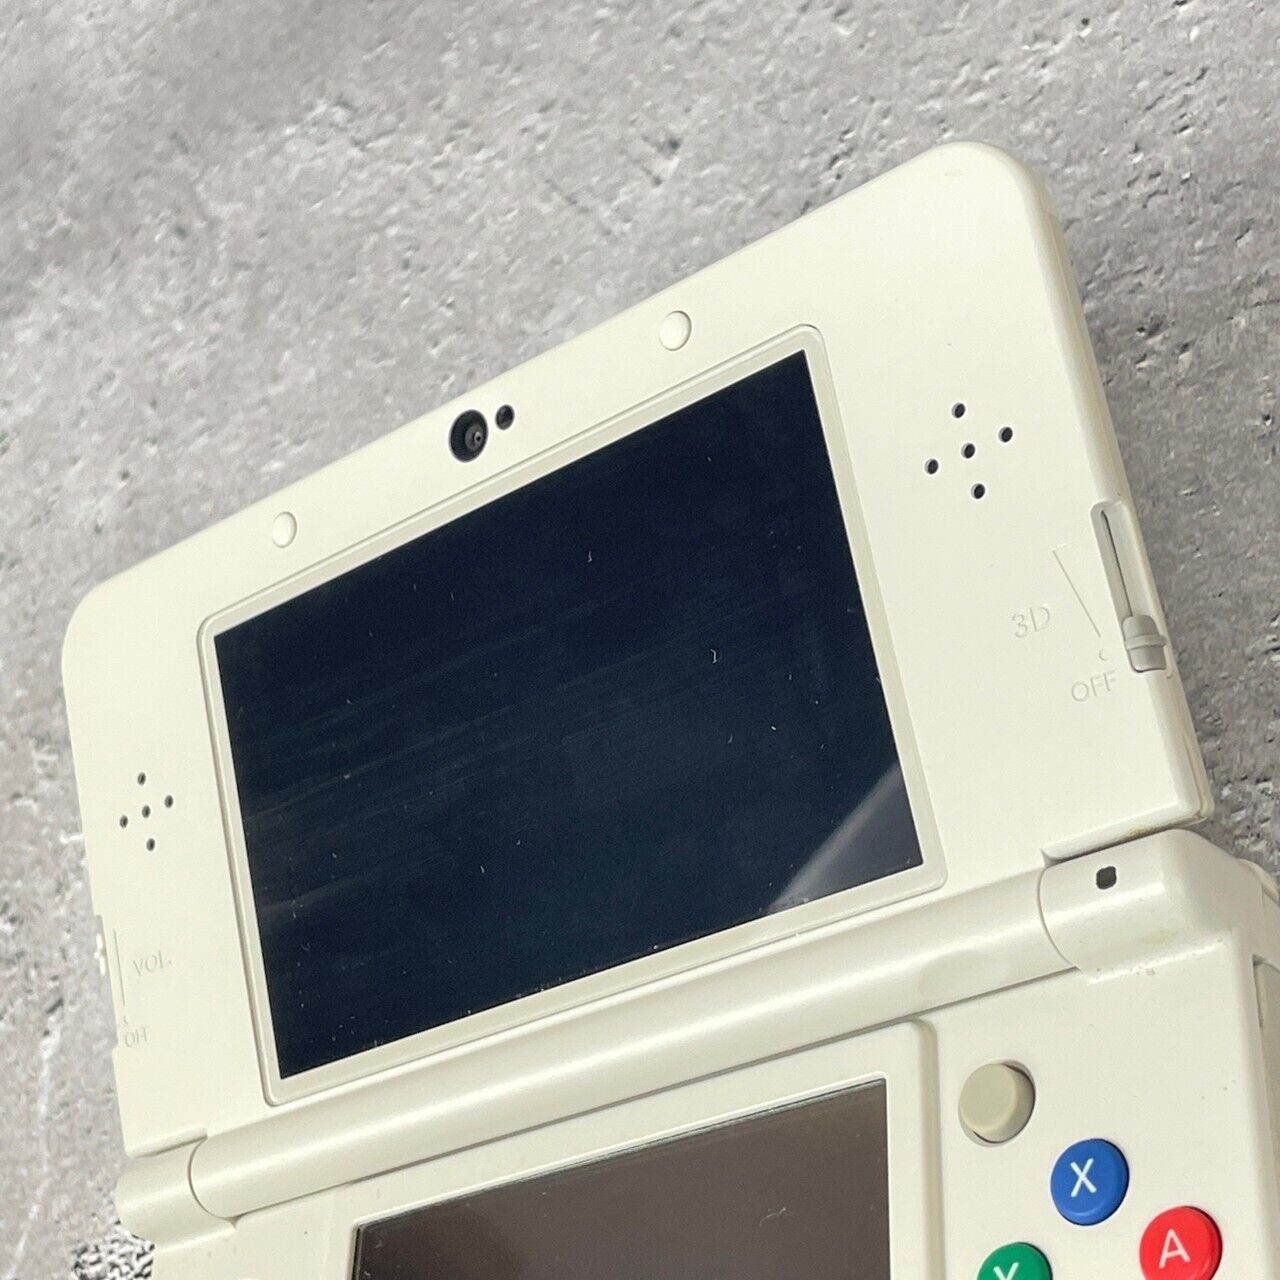 Nintendo new 3DS Console Only Black or White Used Good Japanese Language Edition